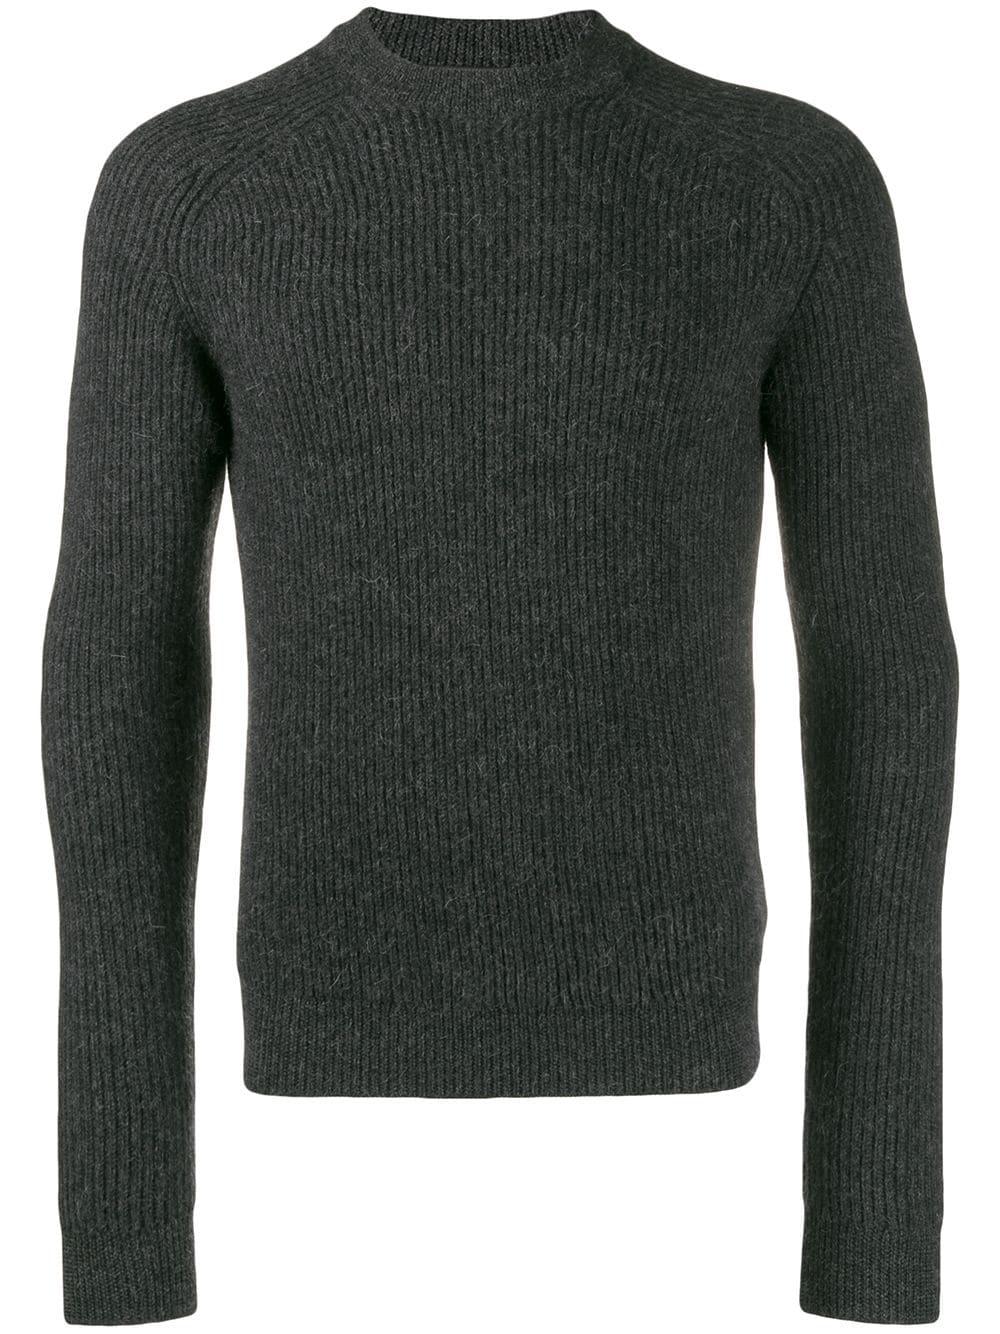 Prada Wool Ribbed Knit Sweater in Grey (Gray) for Men - Save 7% - Lyst